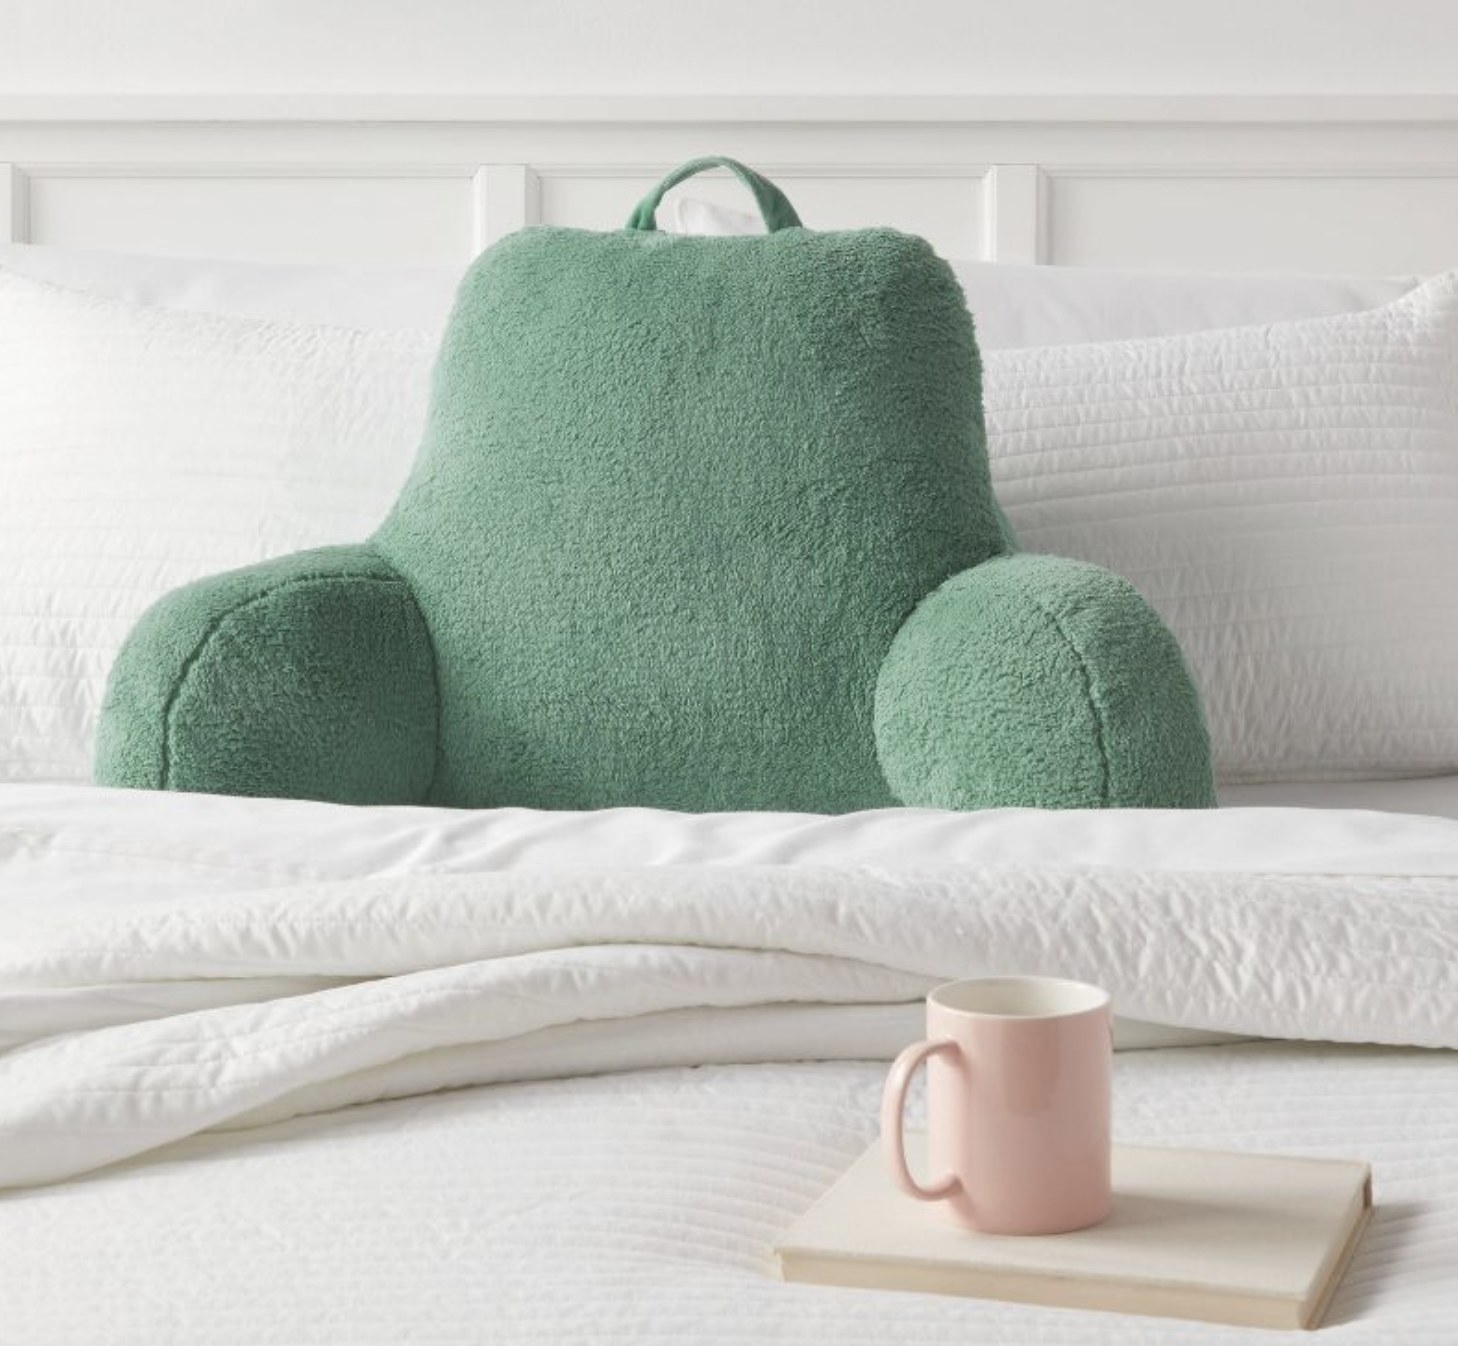 The green pillow on a bed